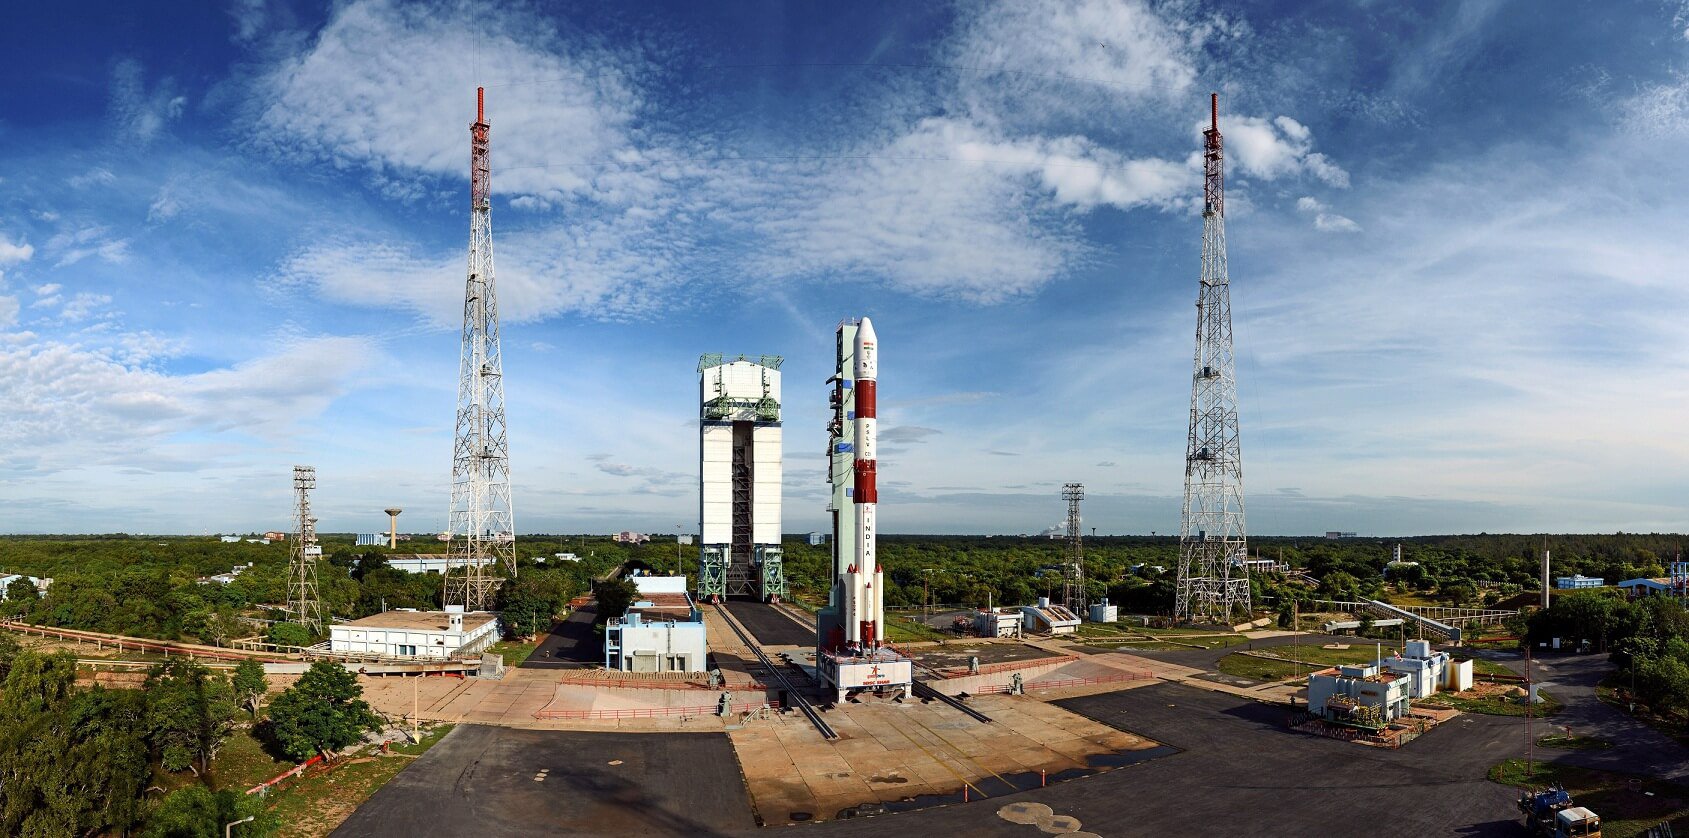 5 Things To Know About PSLV’s Longest Flight That Carried SCATSAT-1 and 7 Other Satellites